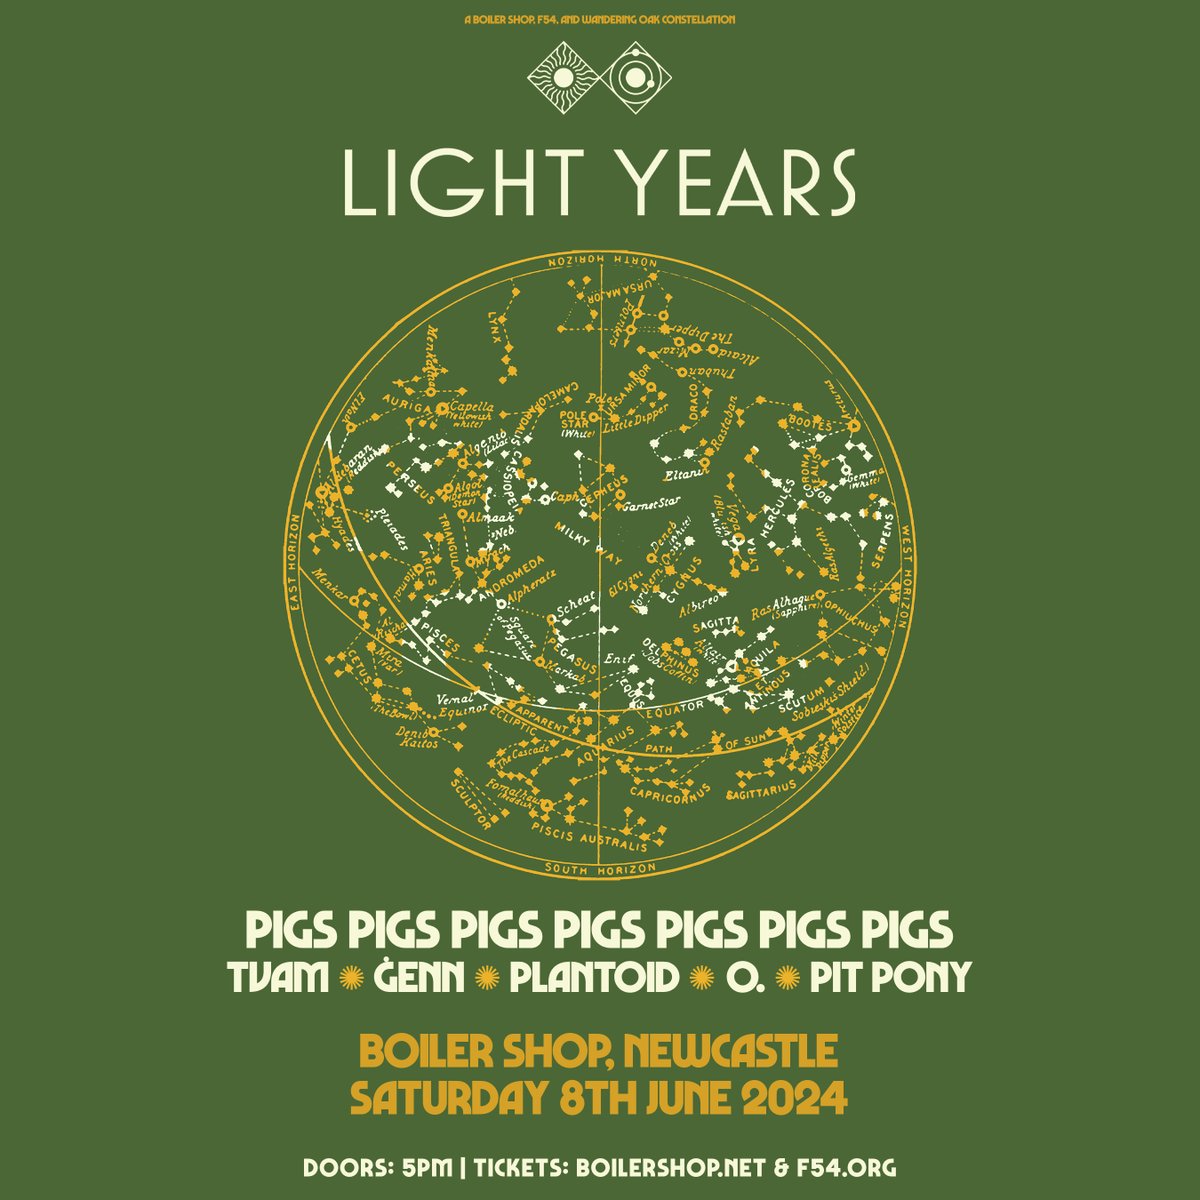 08.06.24. Prepare to explore. From the precious metal of @Pigsx7 to the psychotropics of @_tvam and the art-pop sisterhood of @genntheband , a journey awaits… Light Years tickets on sale now: bit.ly/LightYears24 Catch all of @plantoidworld , O. & @pitponyband too☄️